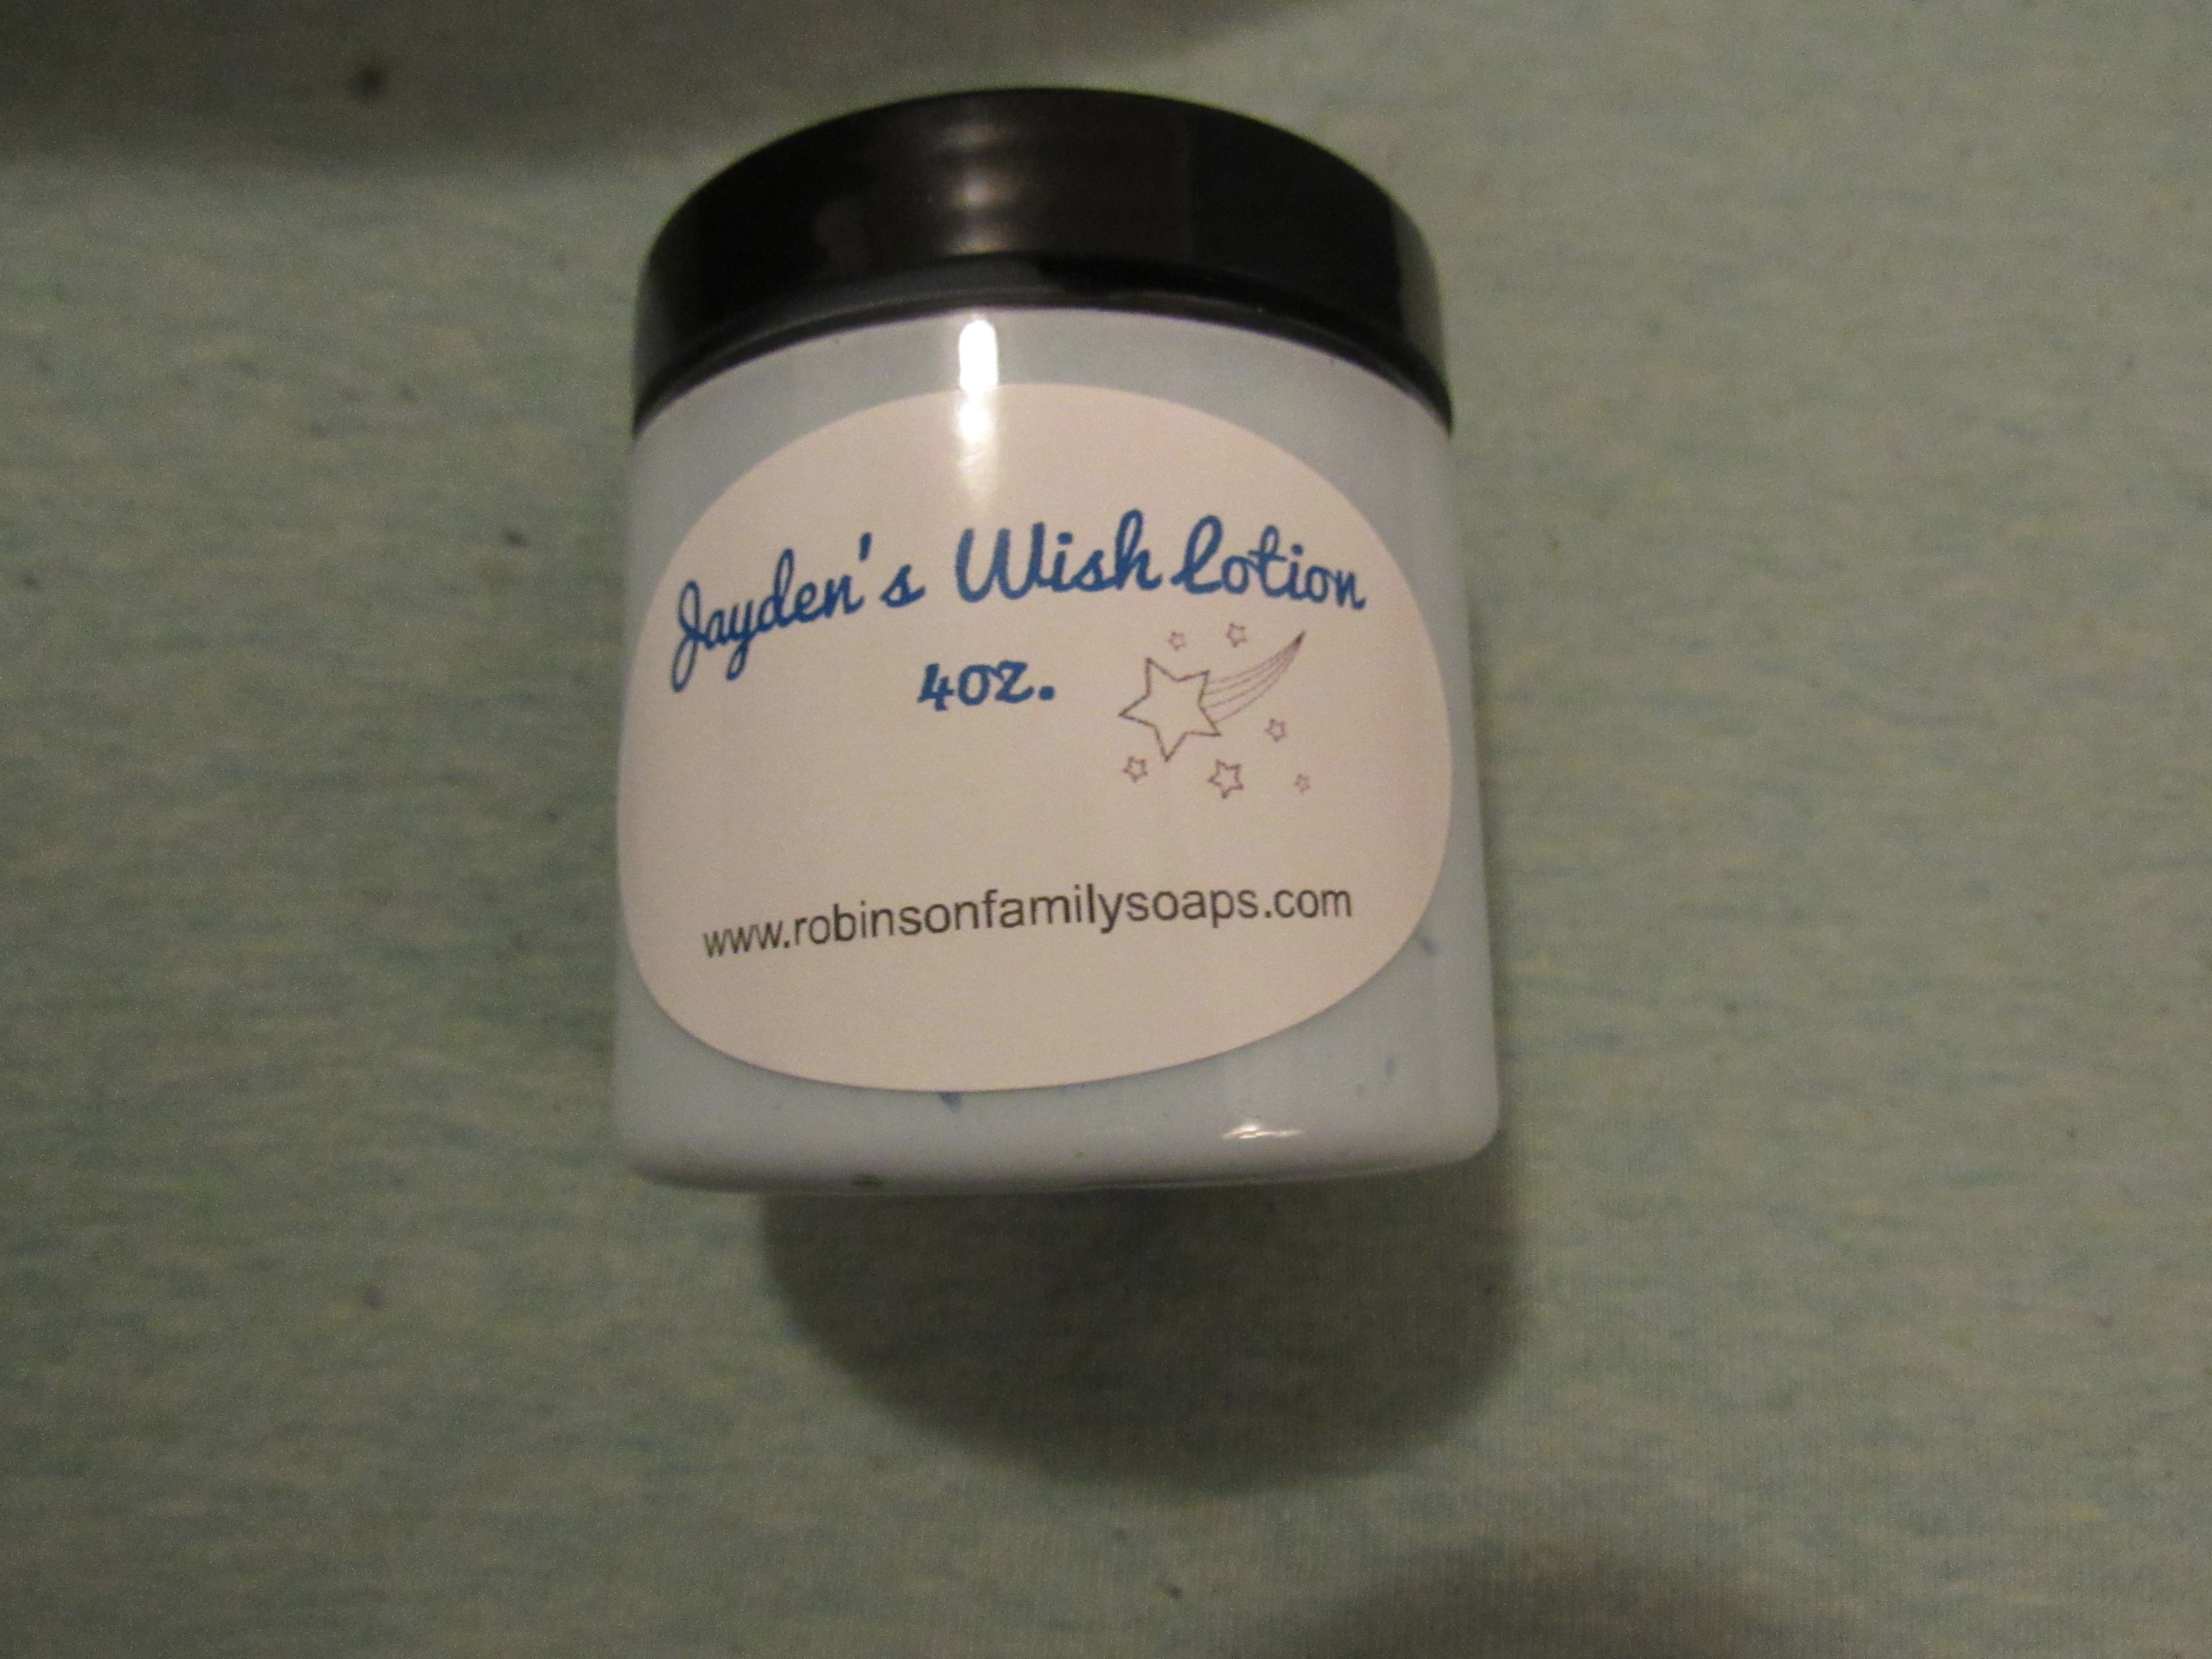 Jayden's Wish Lotion made for people with all skin ailments. 